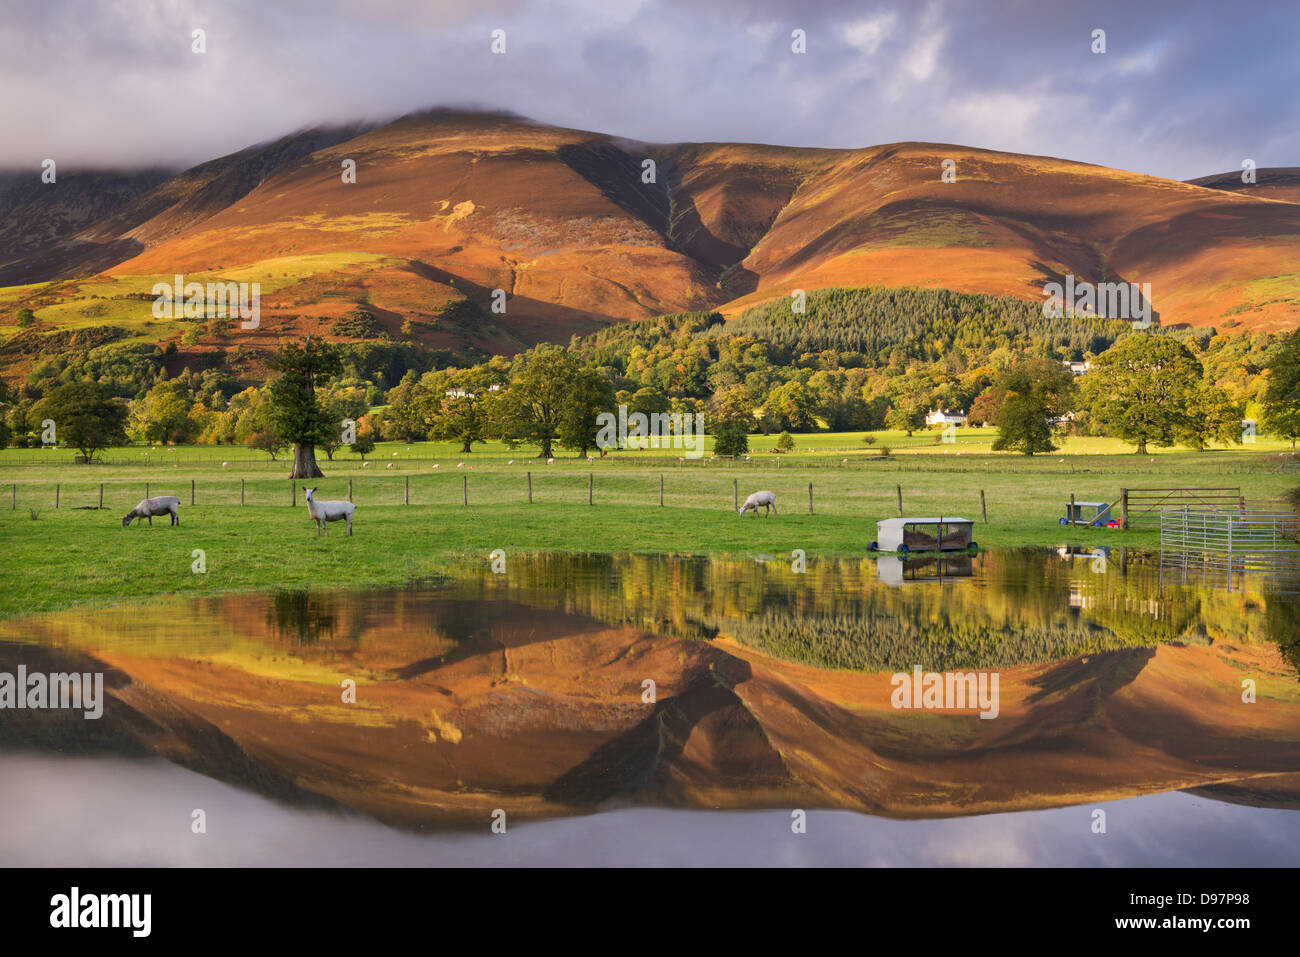 Skiddaw mountain illuminated in golden sunlight, reflected in a flooded field, Keswick, Lake District, Cumbria, England. Stock Photo